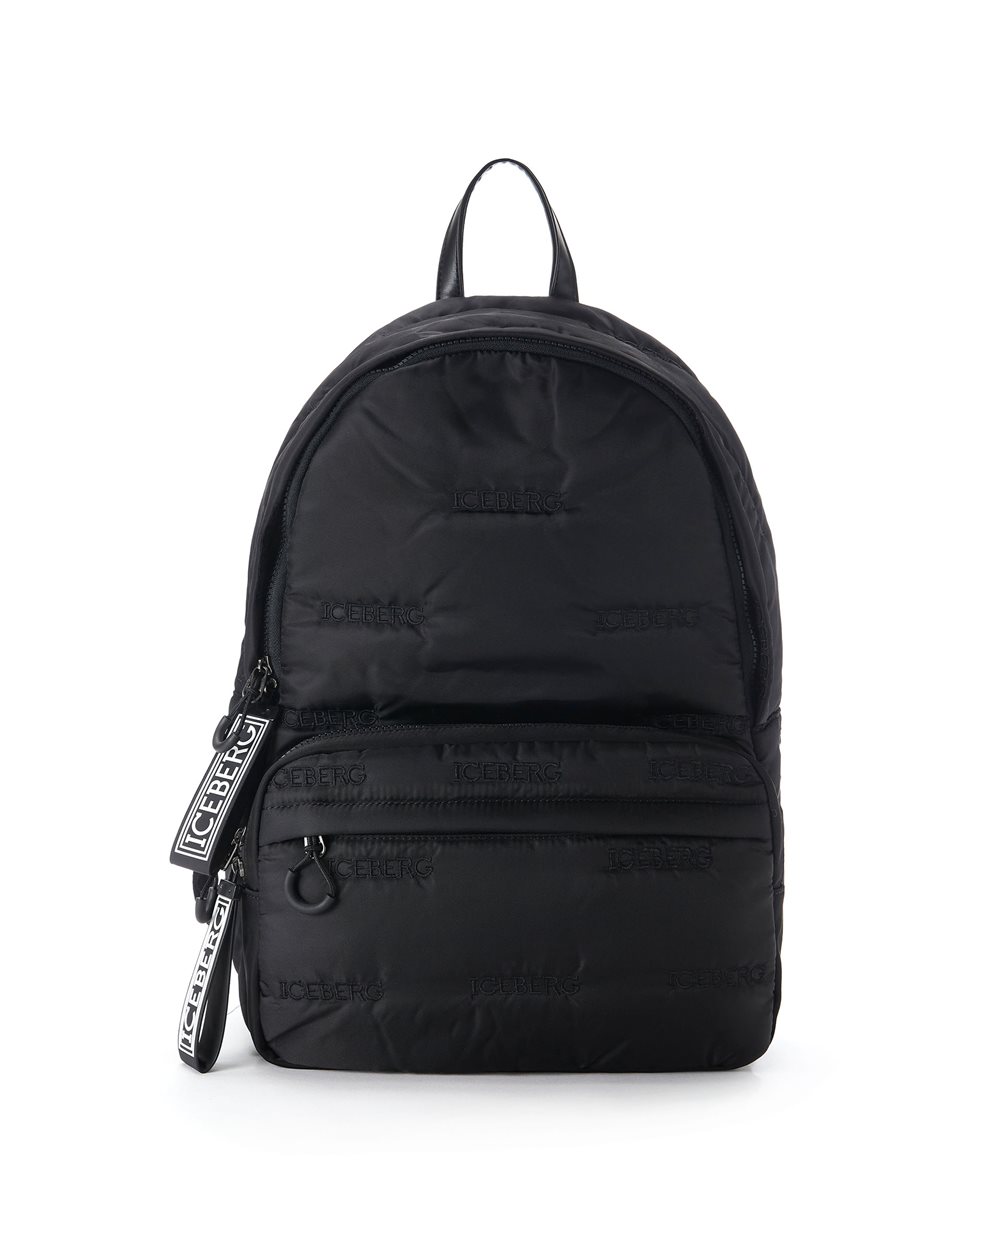 Nylon backpack with allover logo -  ( PRIMO STEP DE ) PROMO SALDI UP TO 40% | Iceberg - Official Website